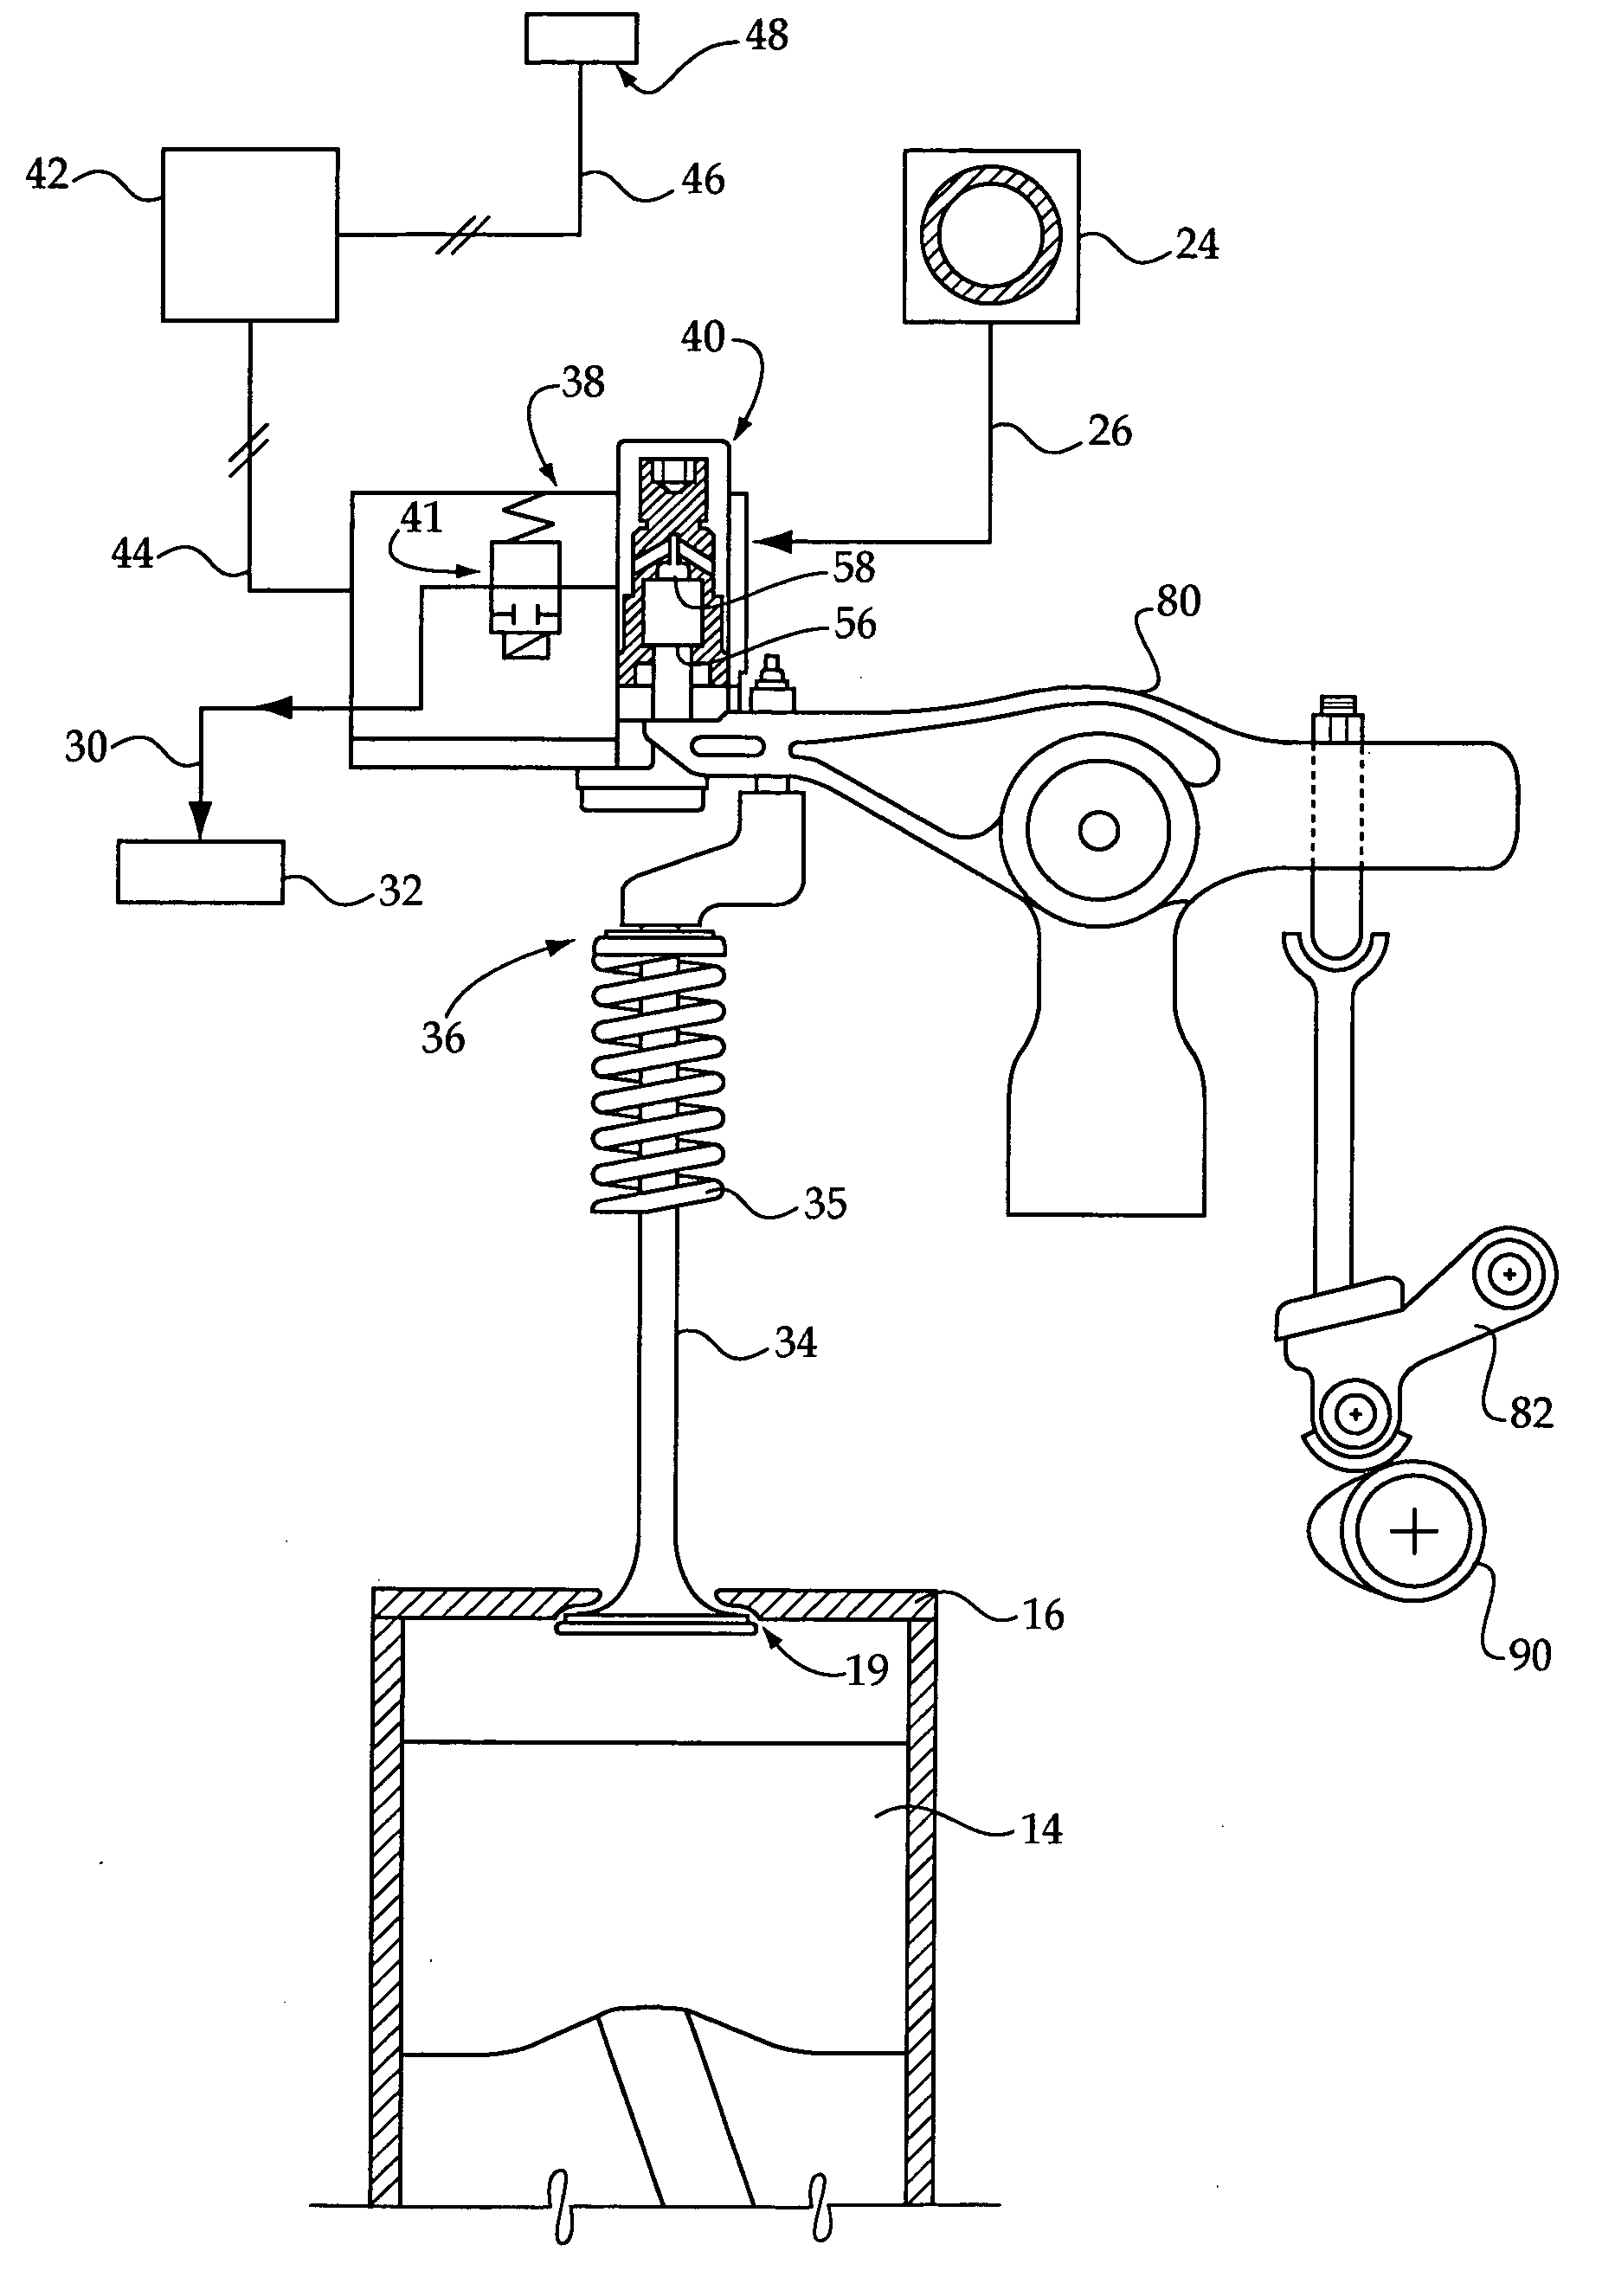 Variable valve performance detection strategy for internal combustion engine